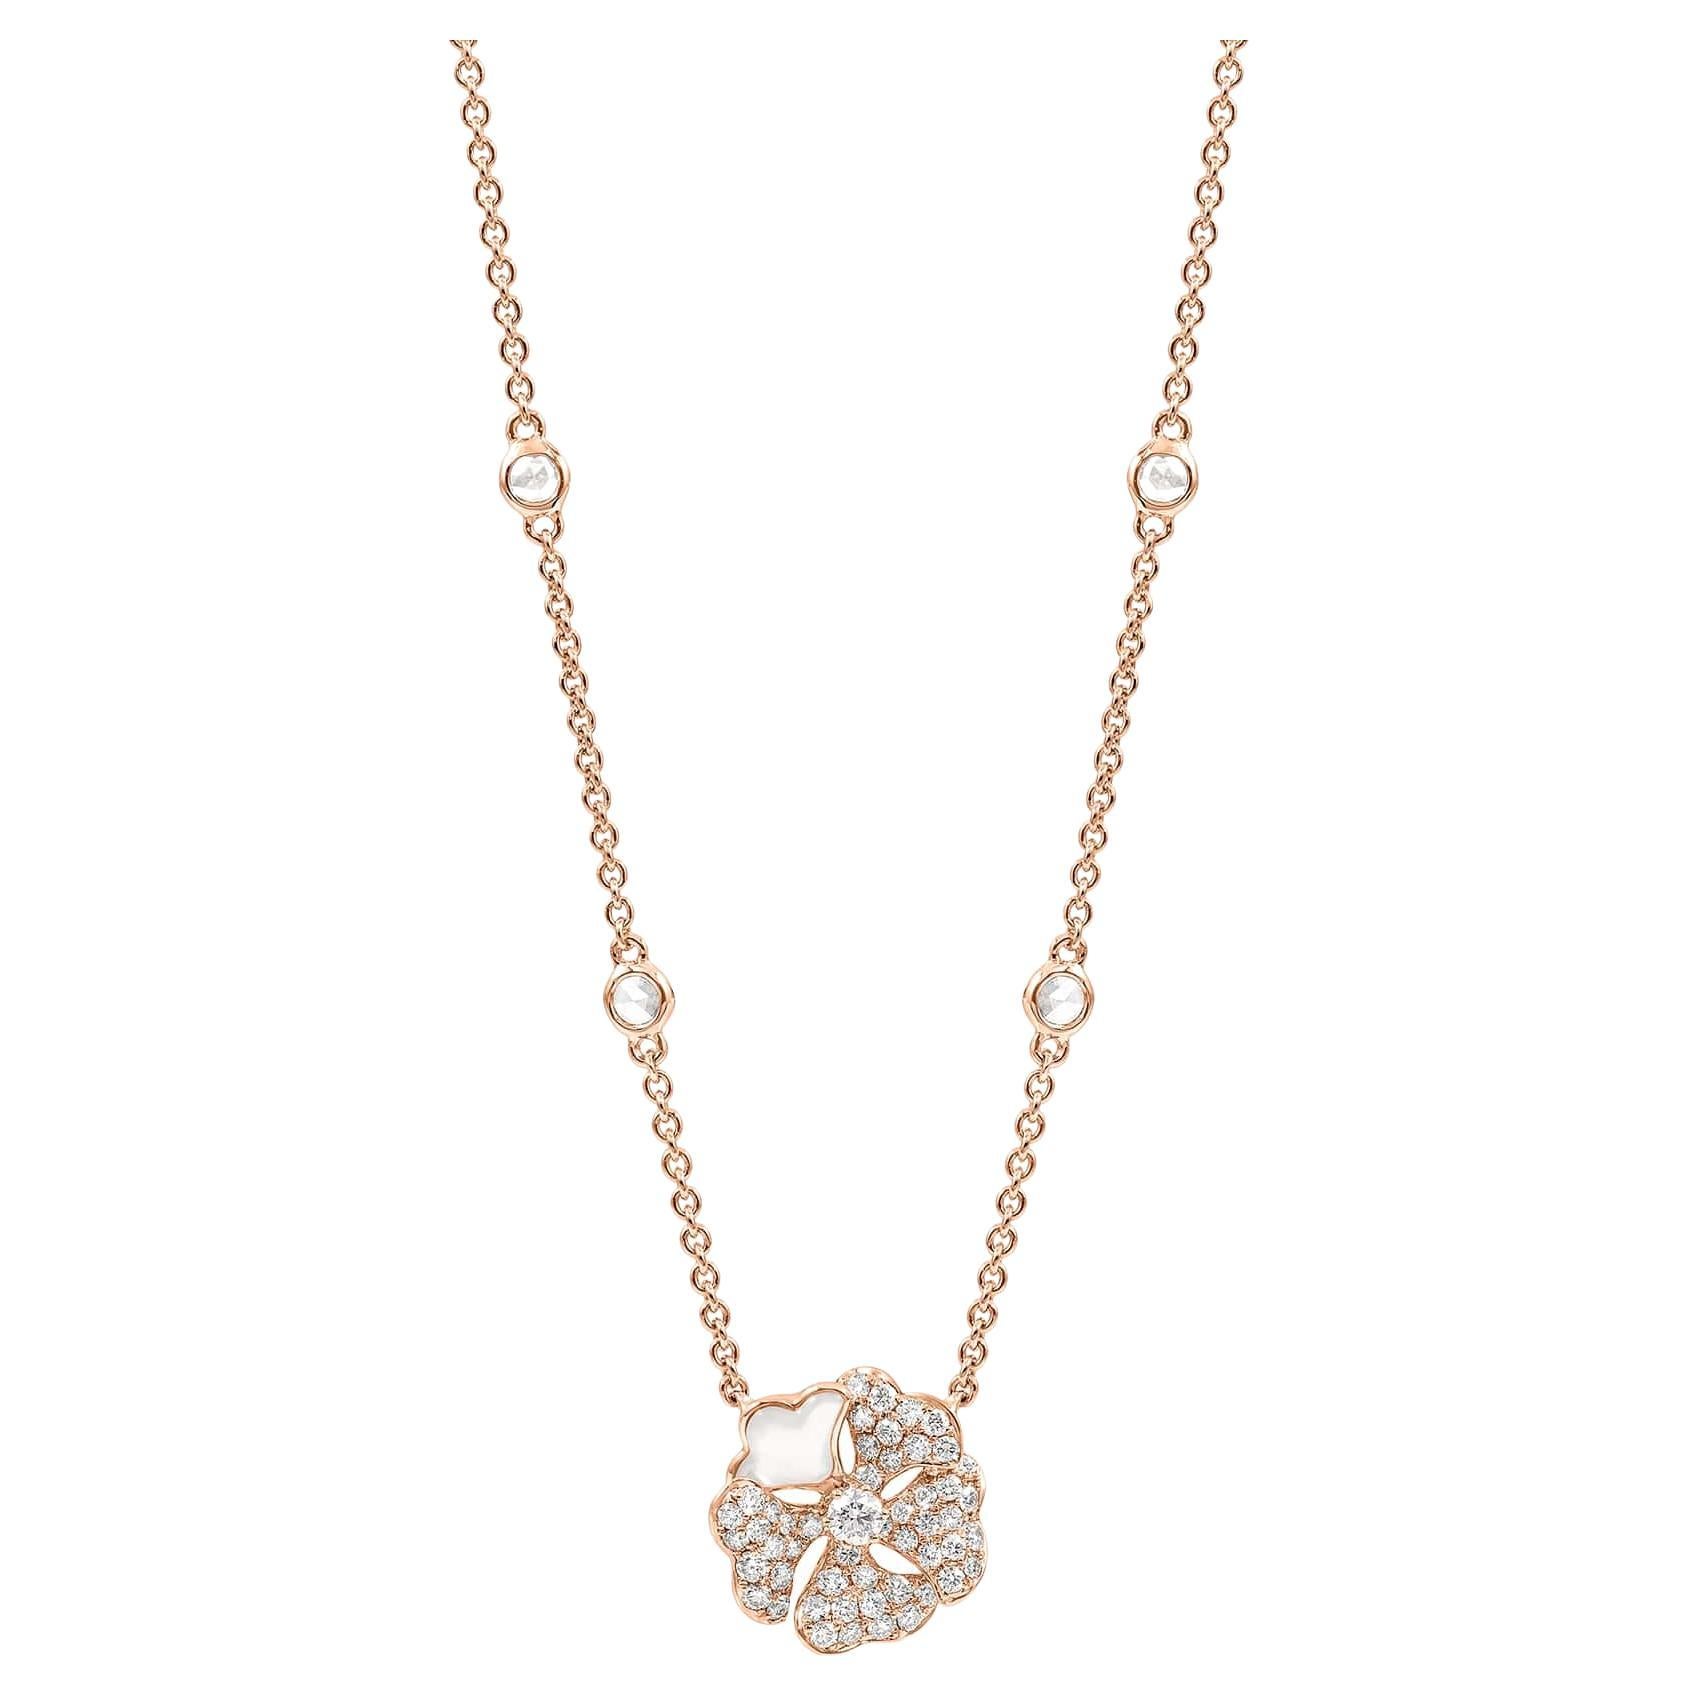 Bloom Pavé Diamond and Mother of Pearl Flower Necklace in 18k Rose Gold